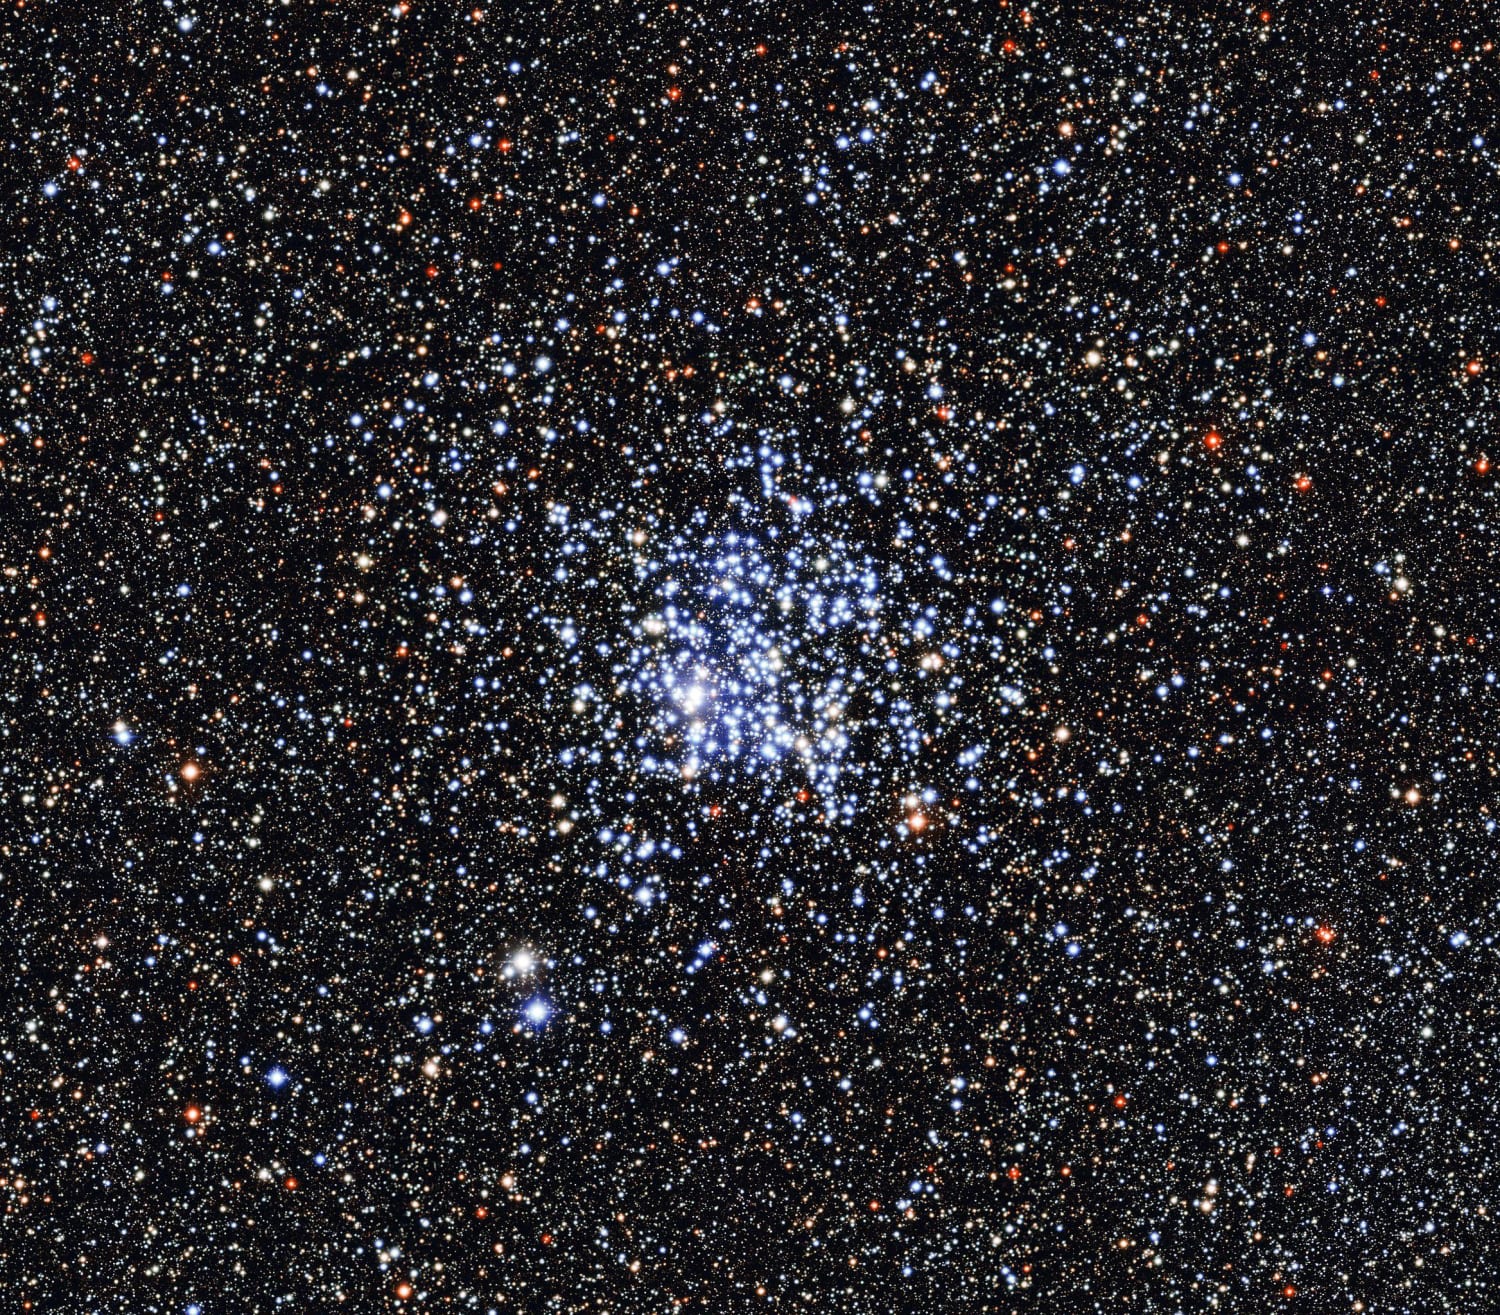 This might not look like a cluster of wild ducks, but it’s still called the Wild Duck Cluster. Also known as Messier 11, this open star cluster’s 2000 stars are only loosely bound by gravity, leading to a short lifespan.